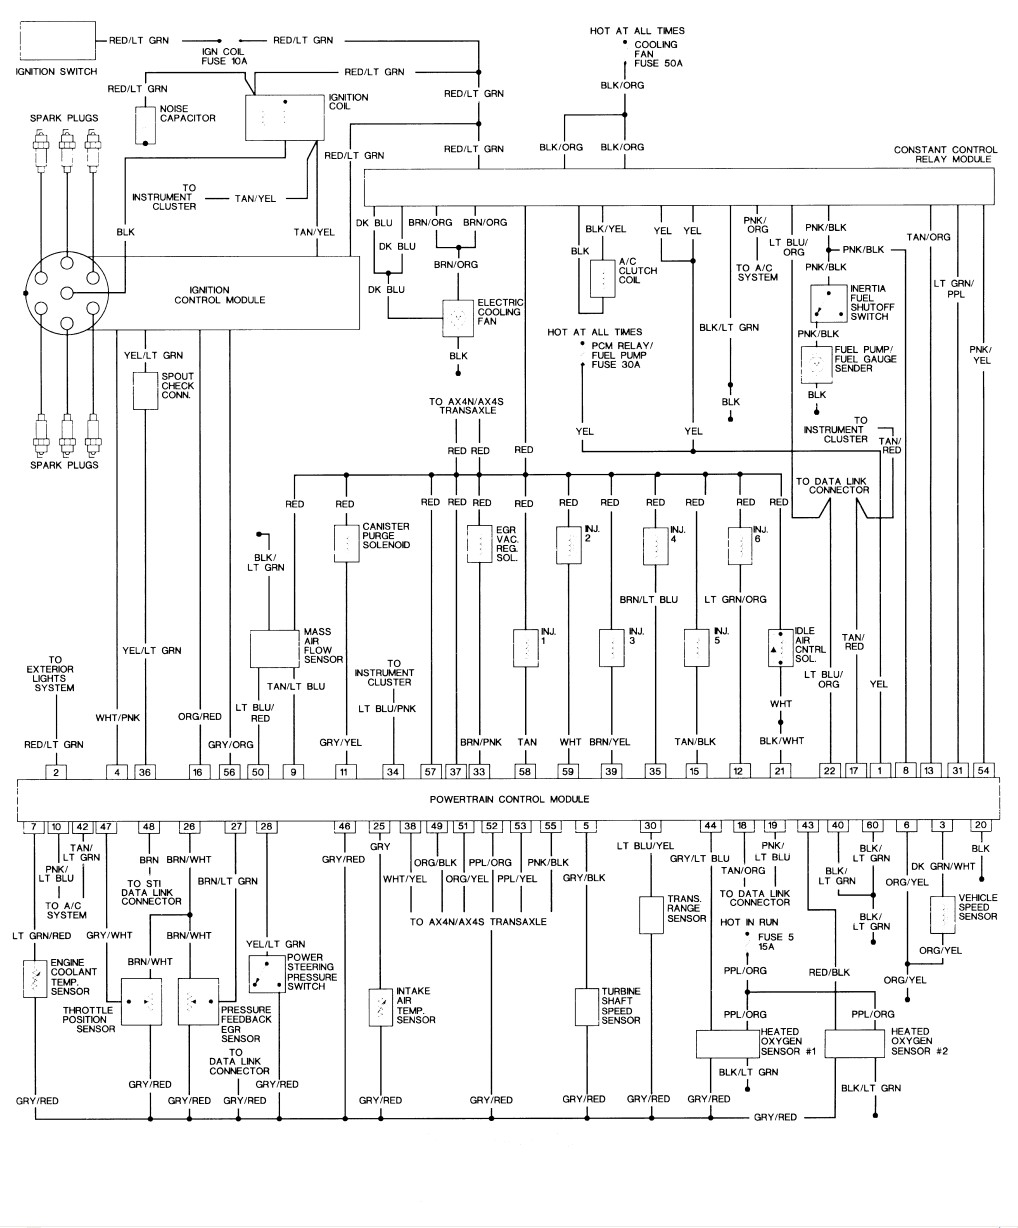 Diagram] 2004 Ford Taurus Wiring Diagram To Ignition Full